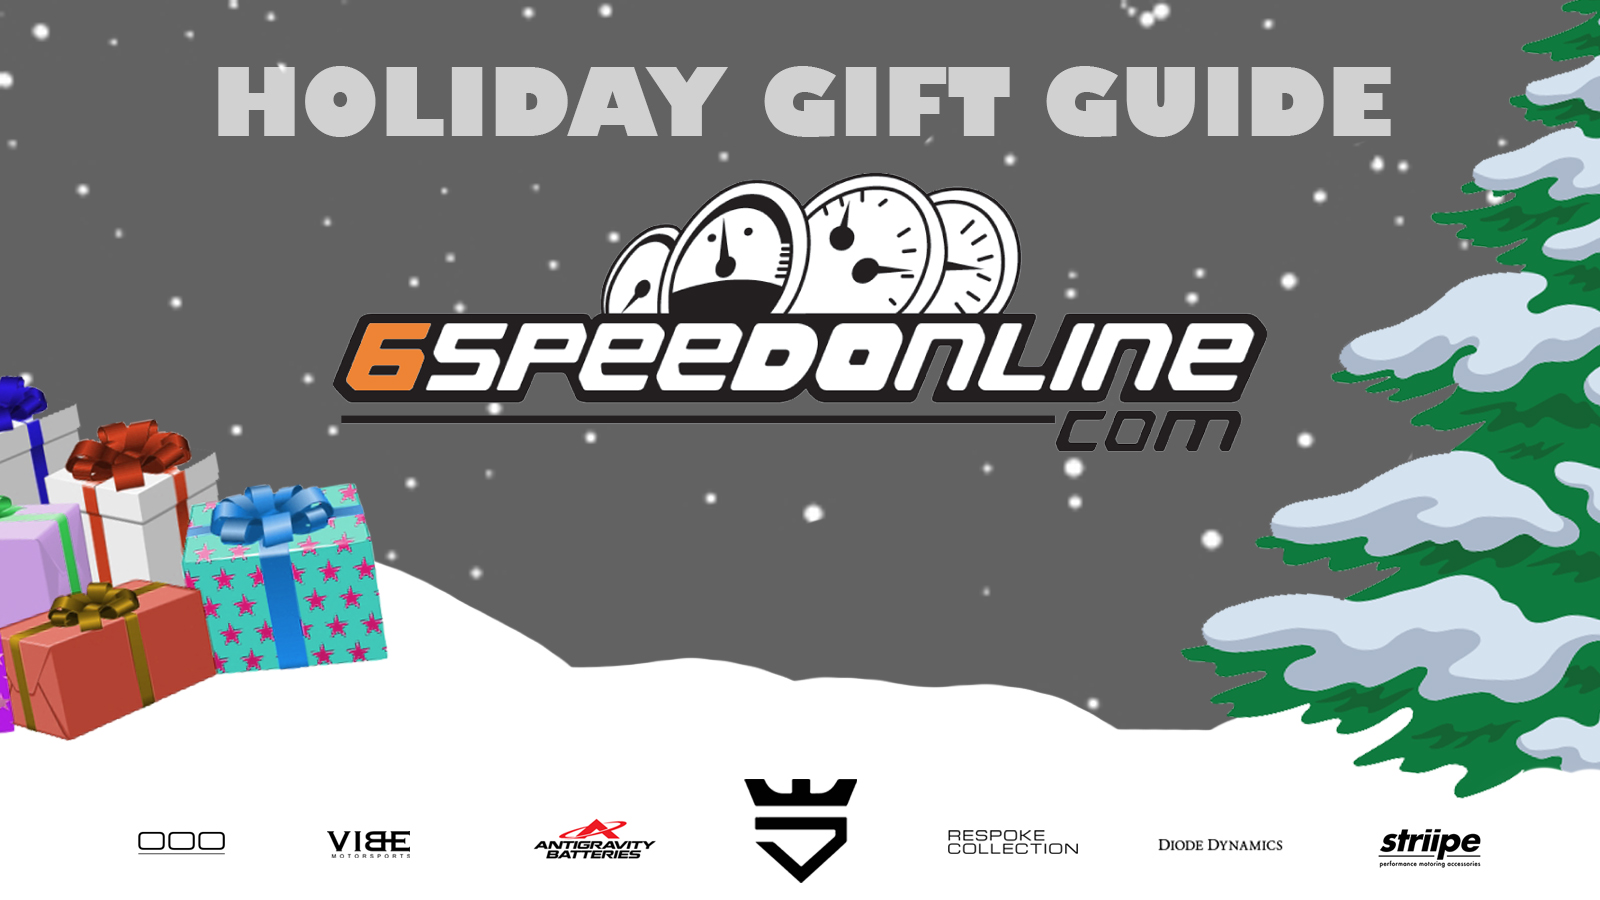 photo of 2020 6 Speed Online Holiday Gift Guide image